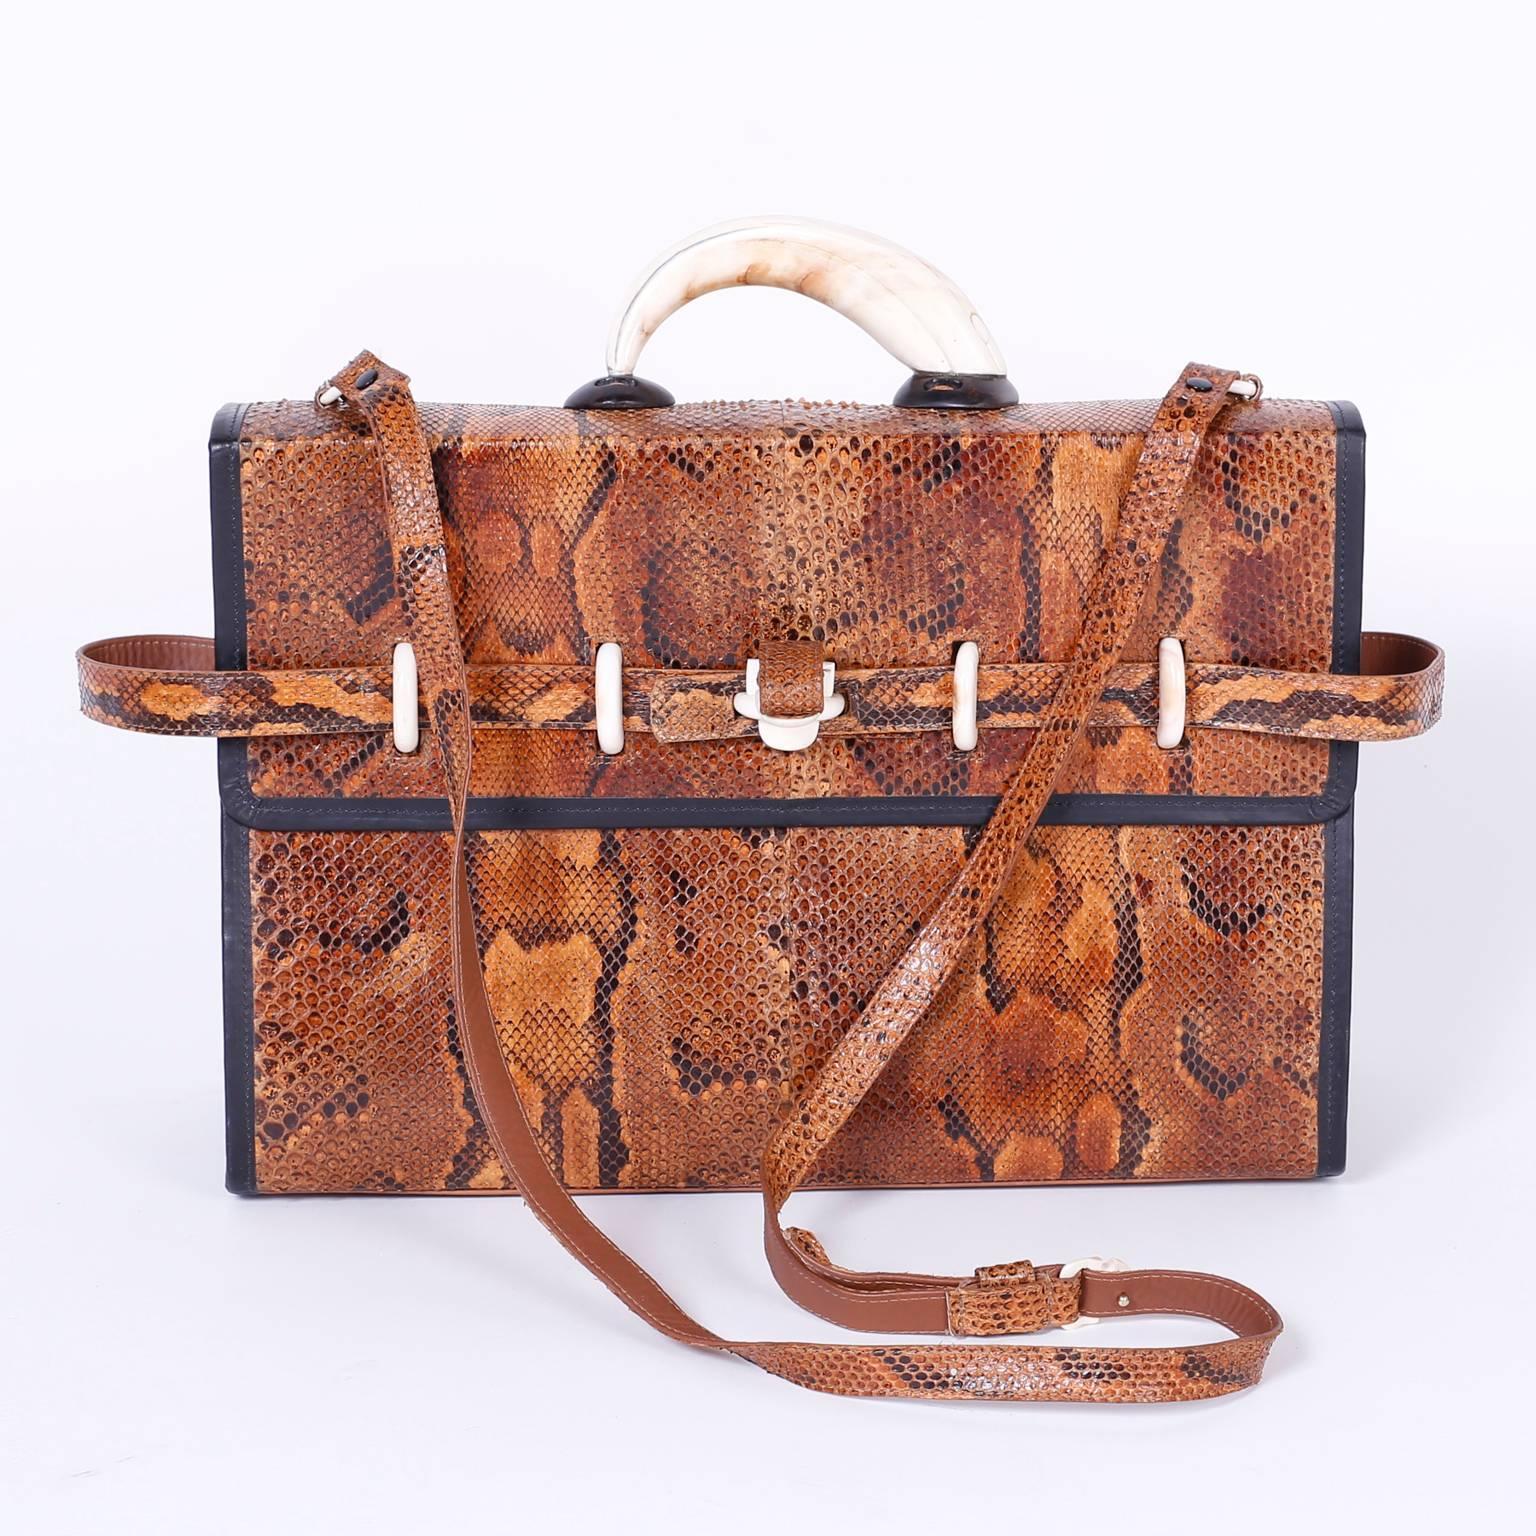 Exotic vintage shoulder bag, briefcase crafted in python skin with a bone handle and belt loops. Handmade by Lowell. Montreal.